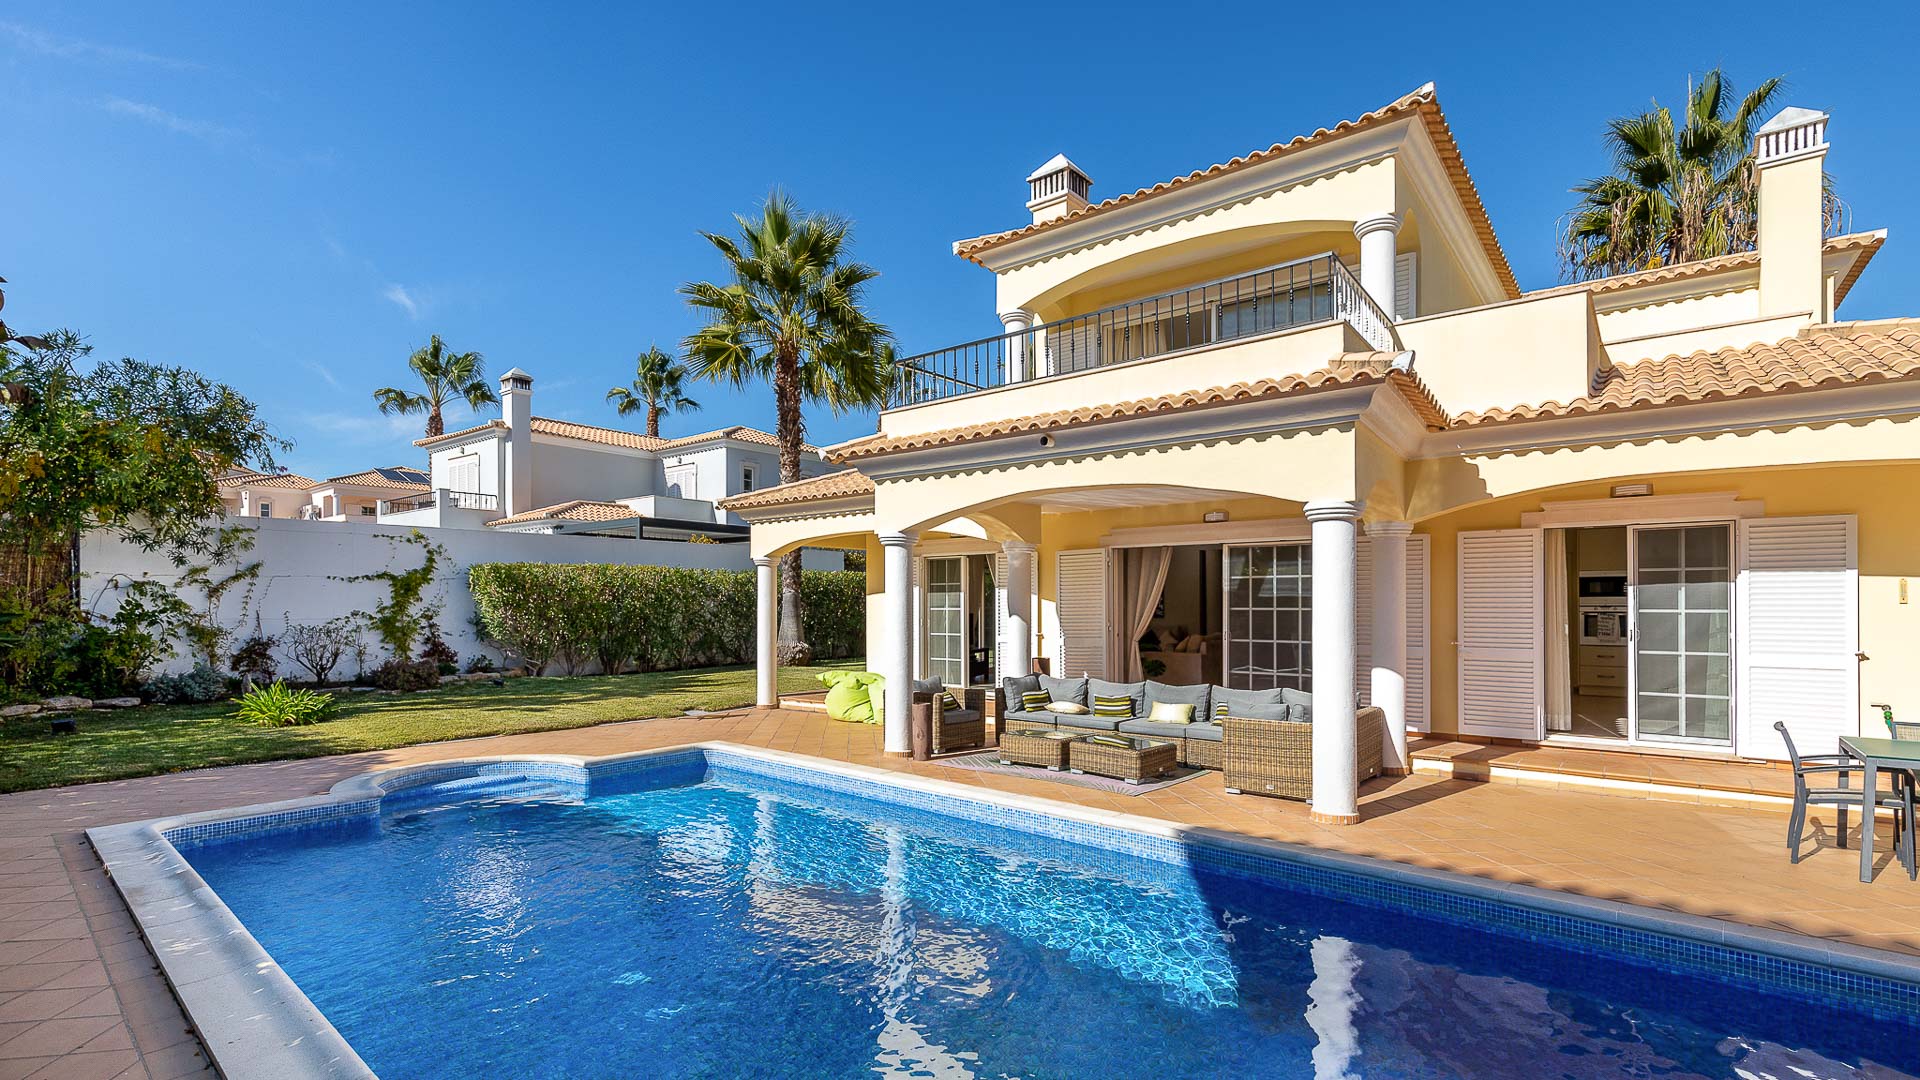 Property Image 1 - Simple Beauty in this Vale do Lobo Rental Villa